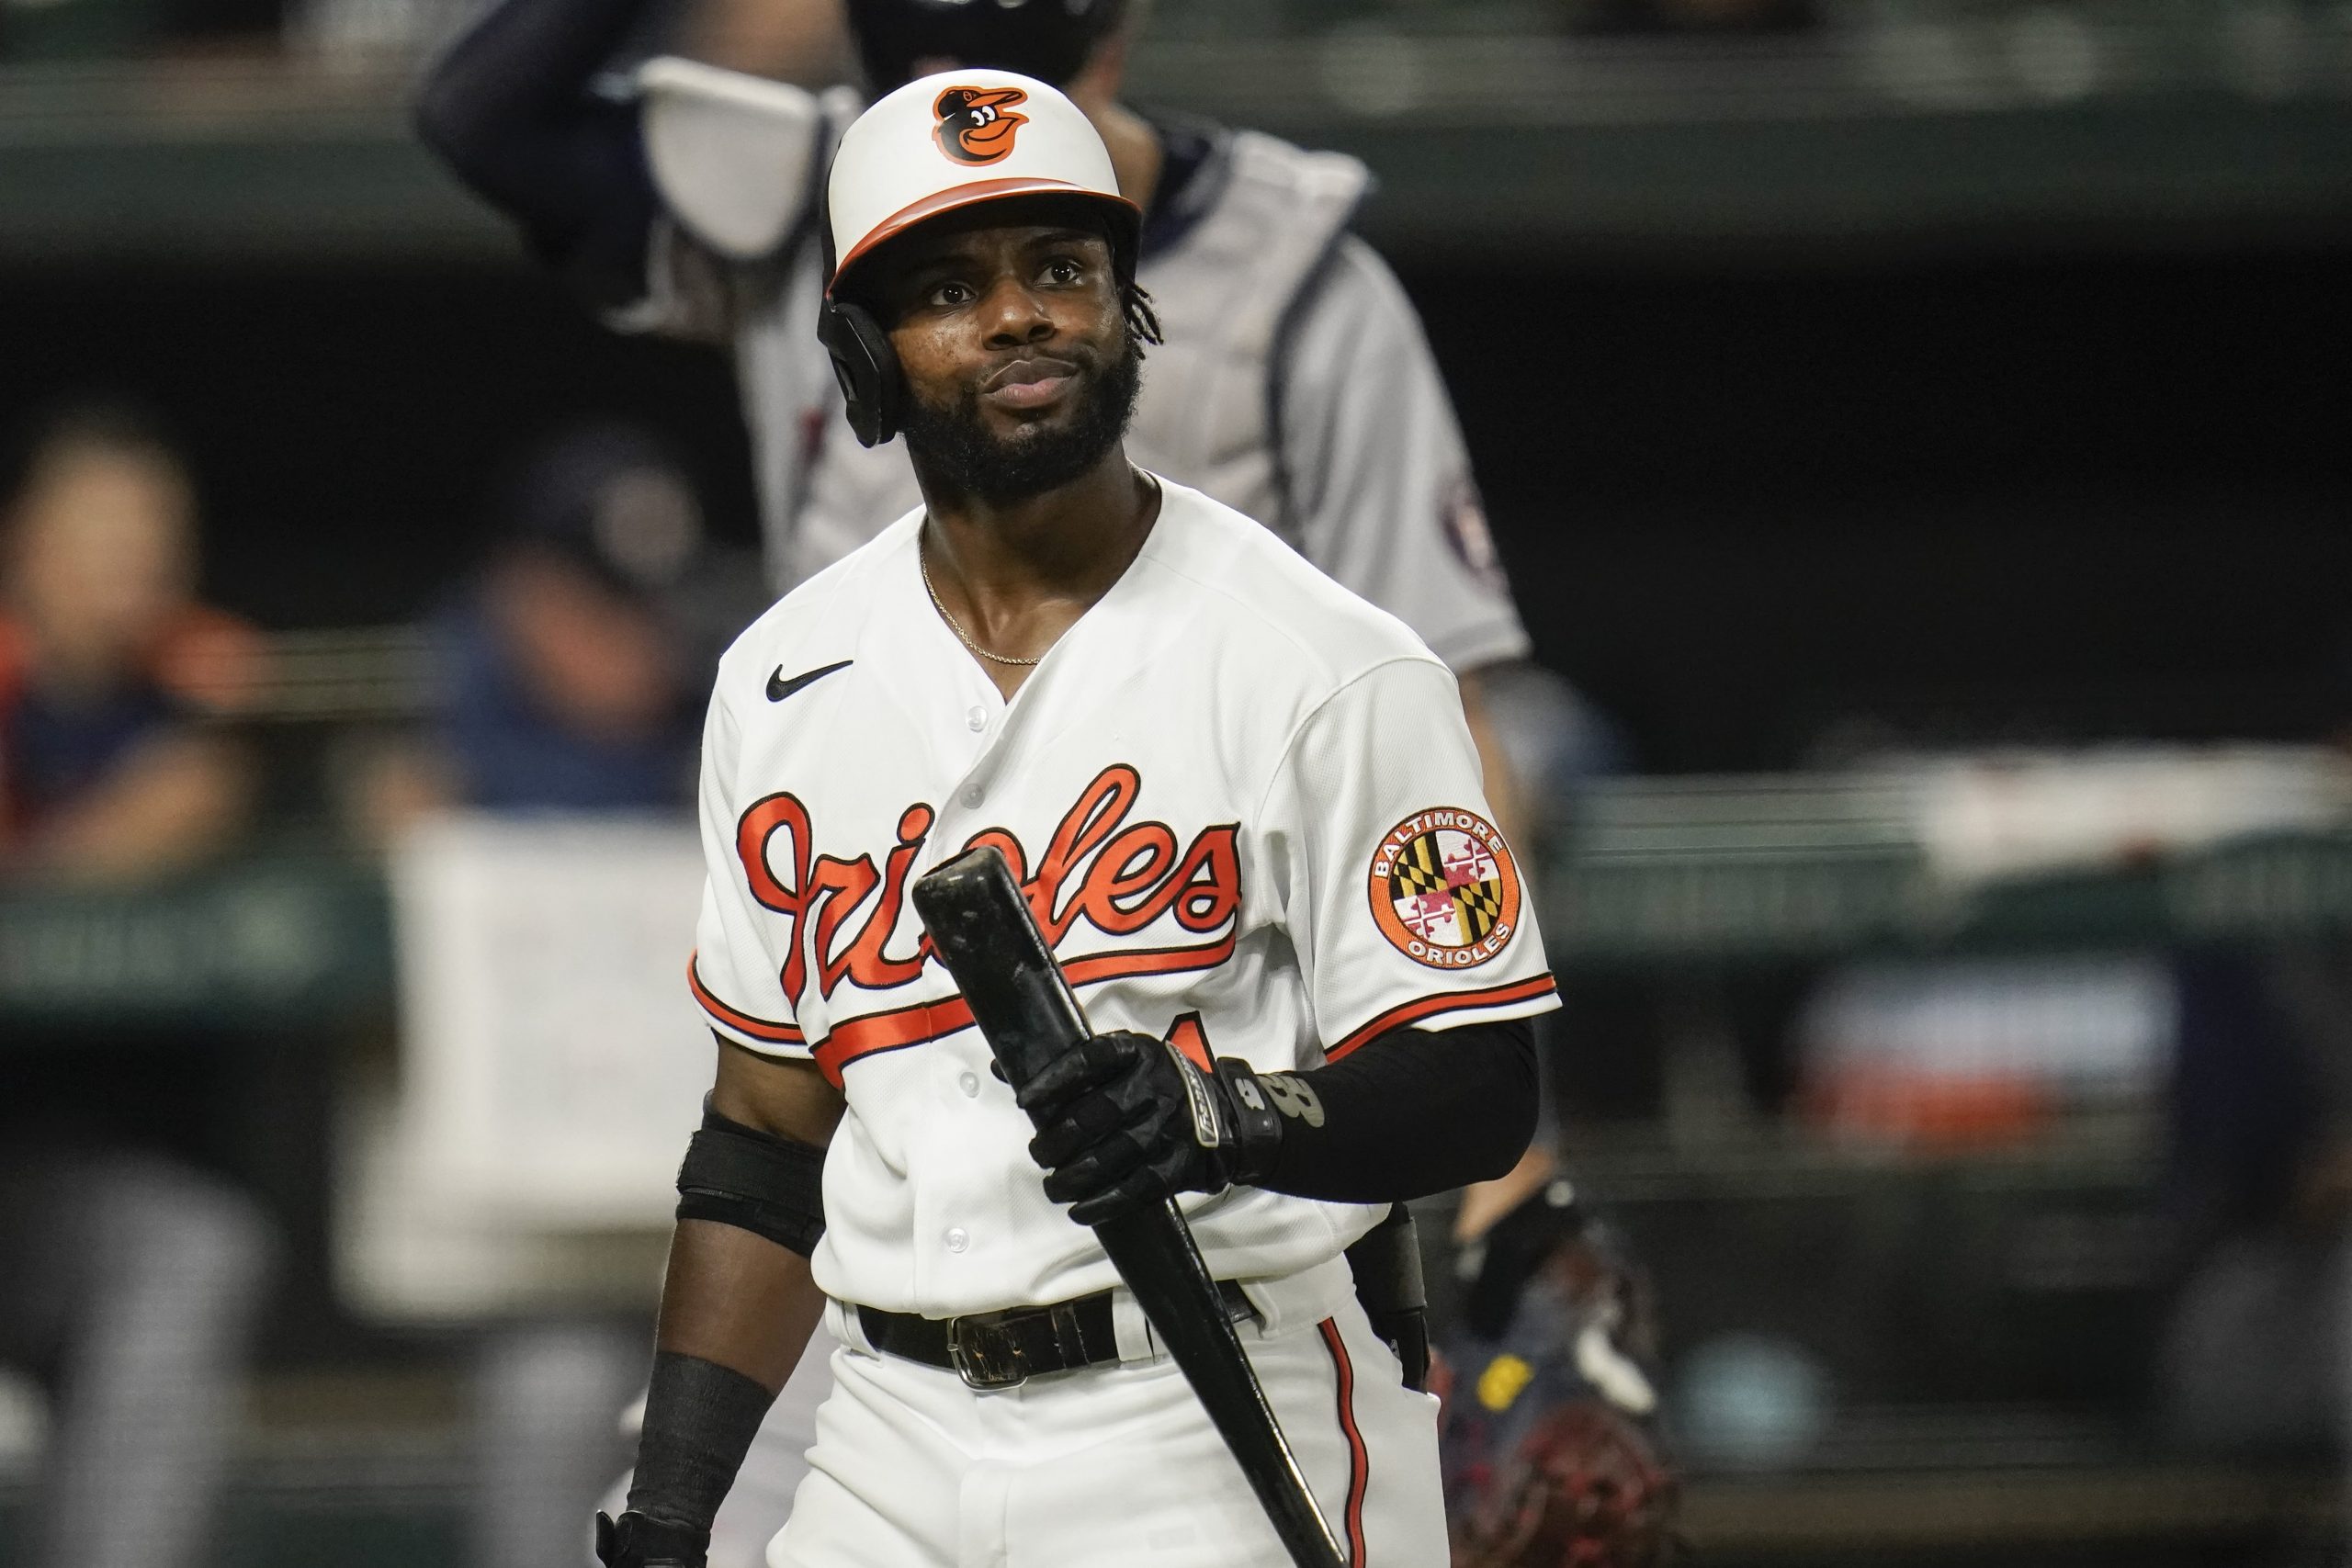 Baltimore Orioles' Cedric Mullins reacts after striking out against the Houston Astros during the fourth inning of a baseball game, Monday, June 21, 2021, in Baltimore.